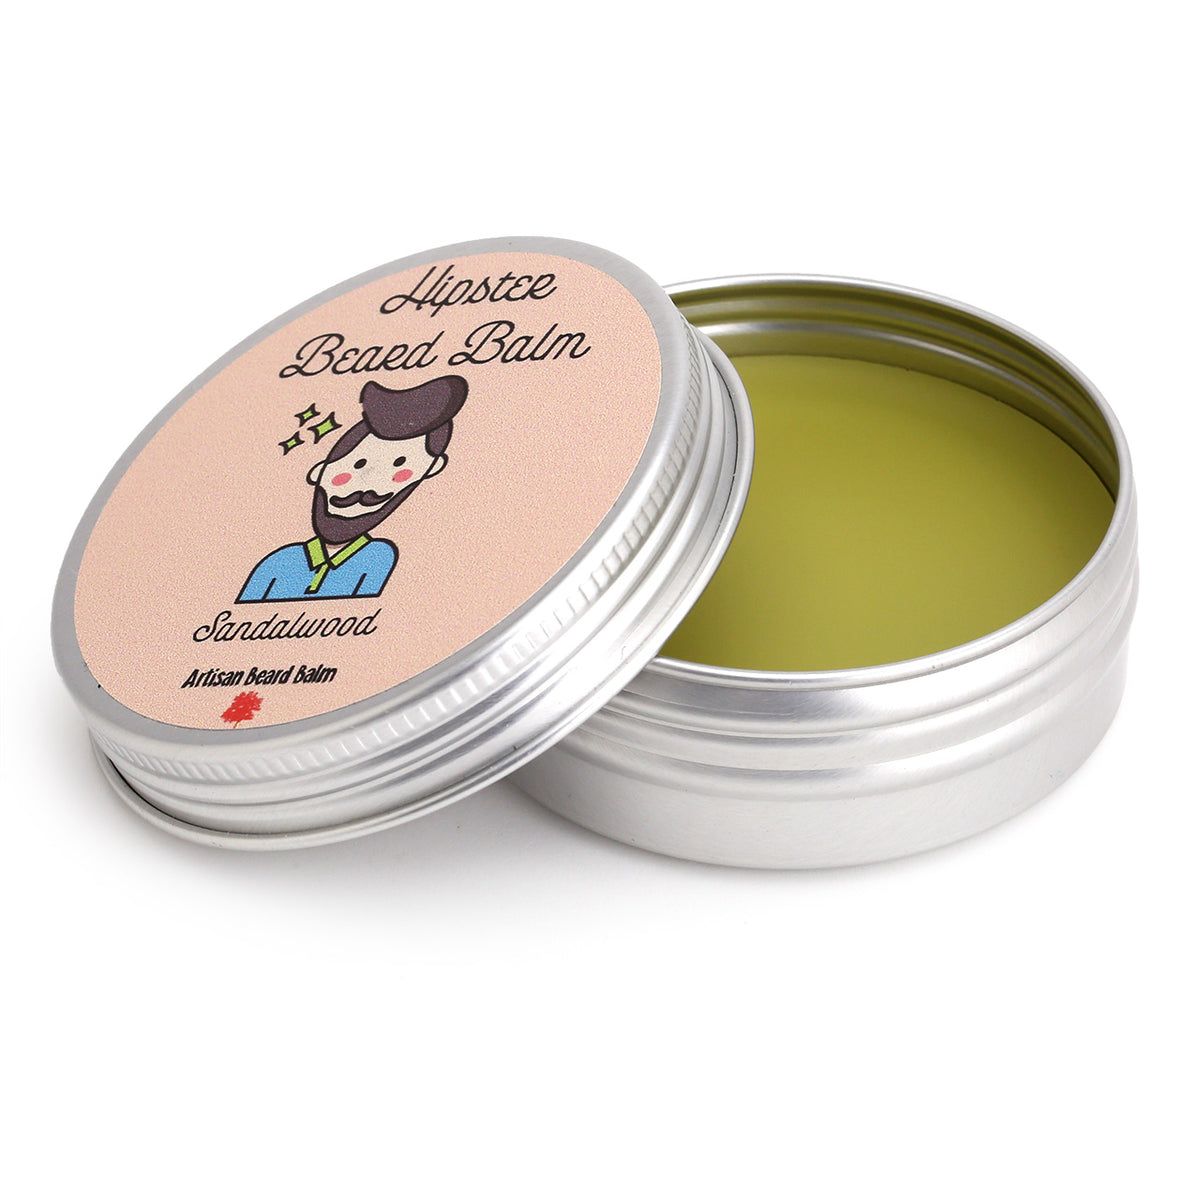 Whispers from The Woods Beard Balm - Sandalwood, showing inside the tin